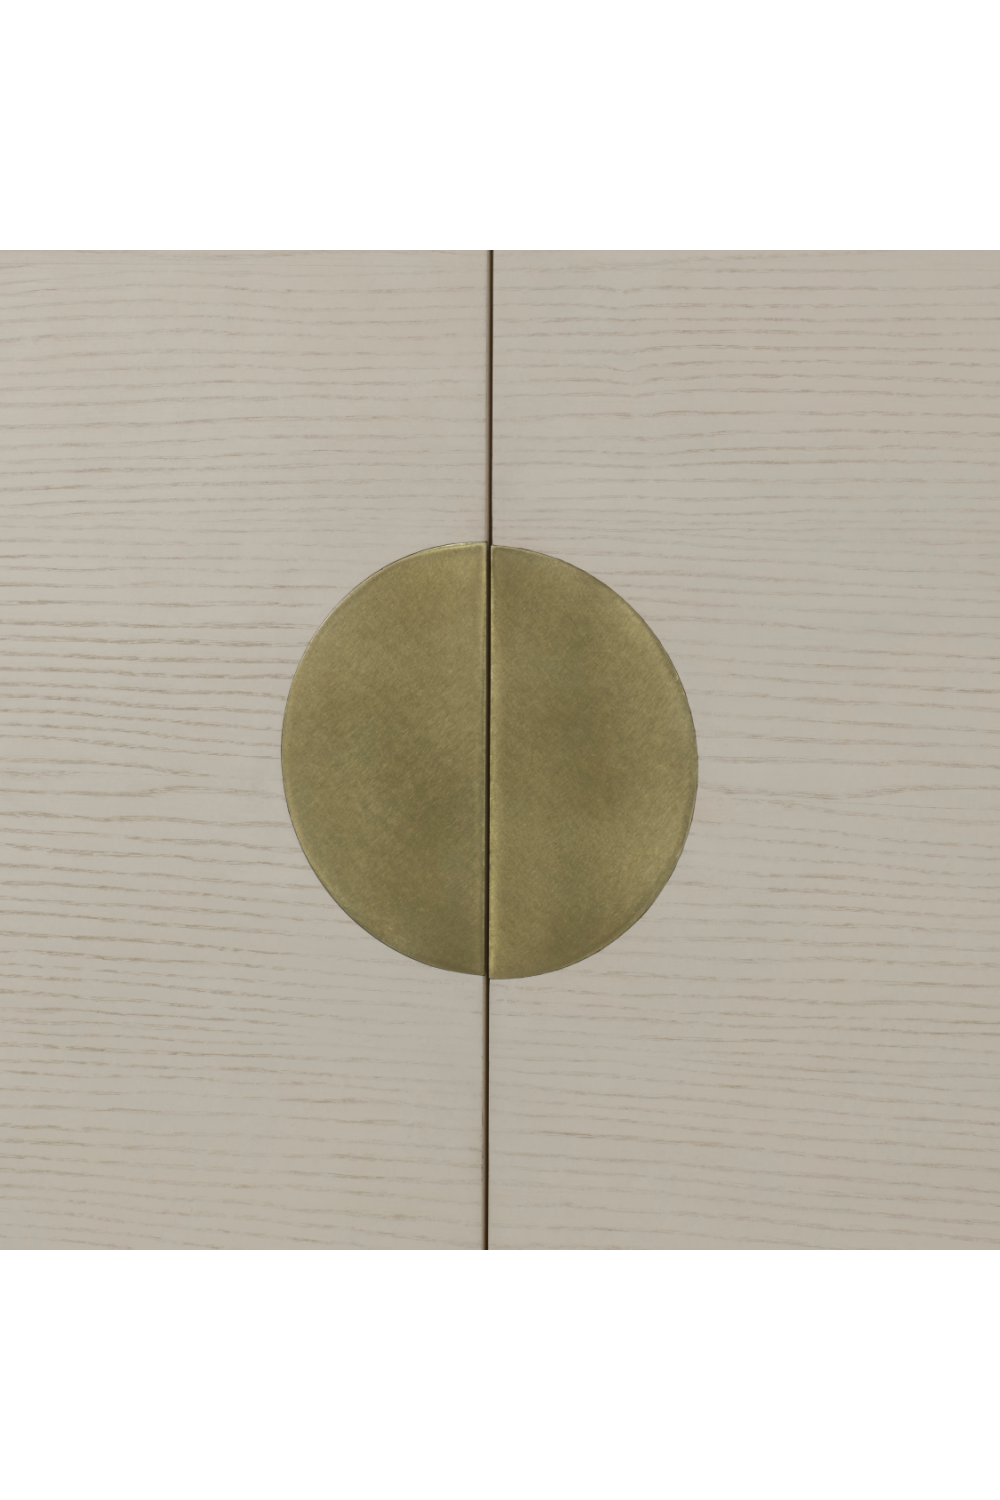 Aged Brass Ash High Cabinet | Andrew Martin Louis | OROA